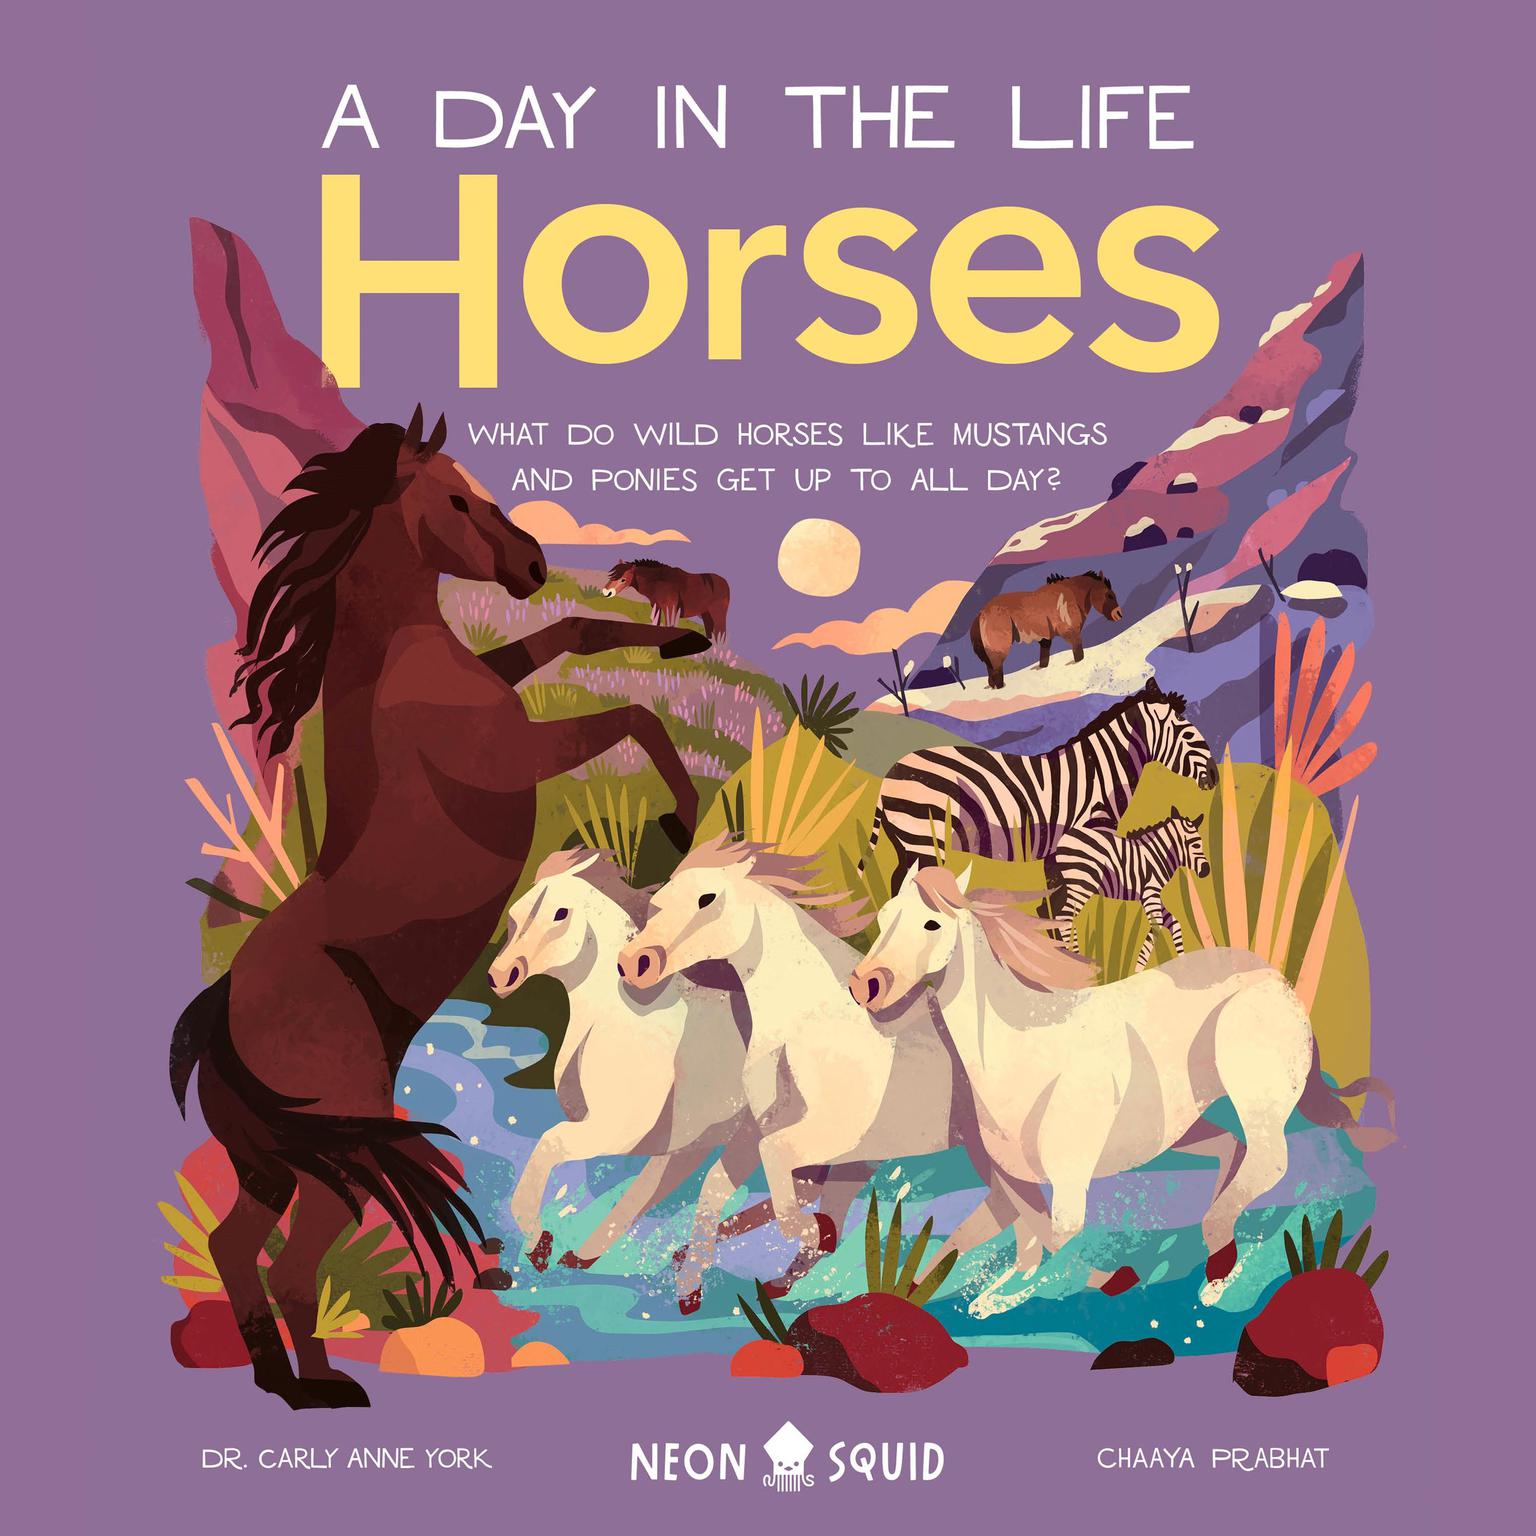 Horses (A Day in the Life): What Do Wild Horses like Mustangs and Ponies Get Up To All Day? Audiobook, by Carly Anne York